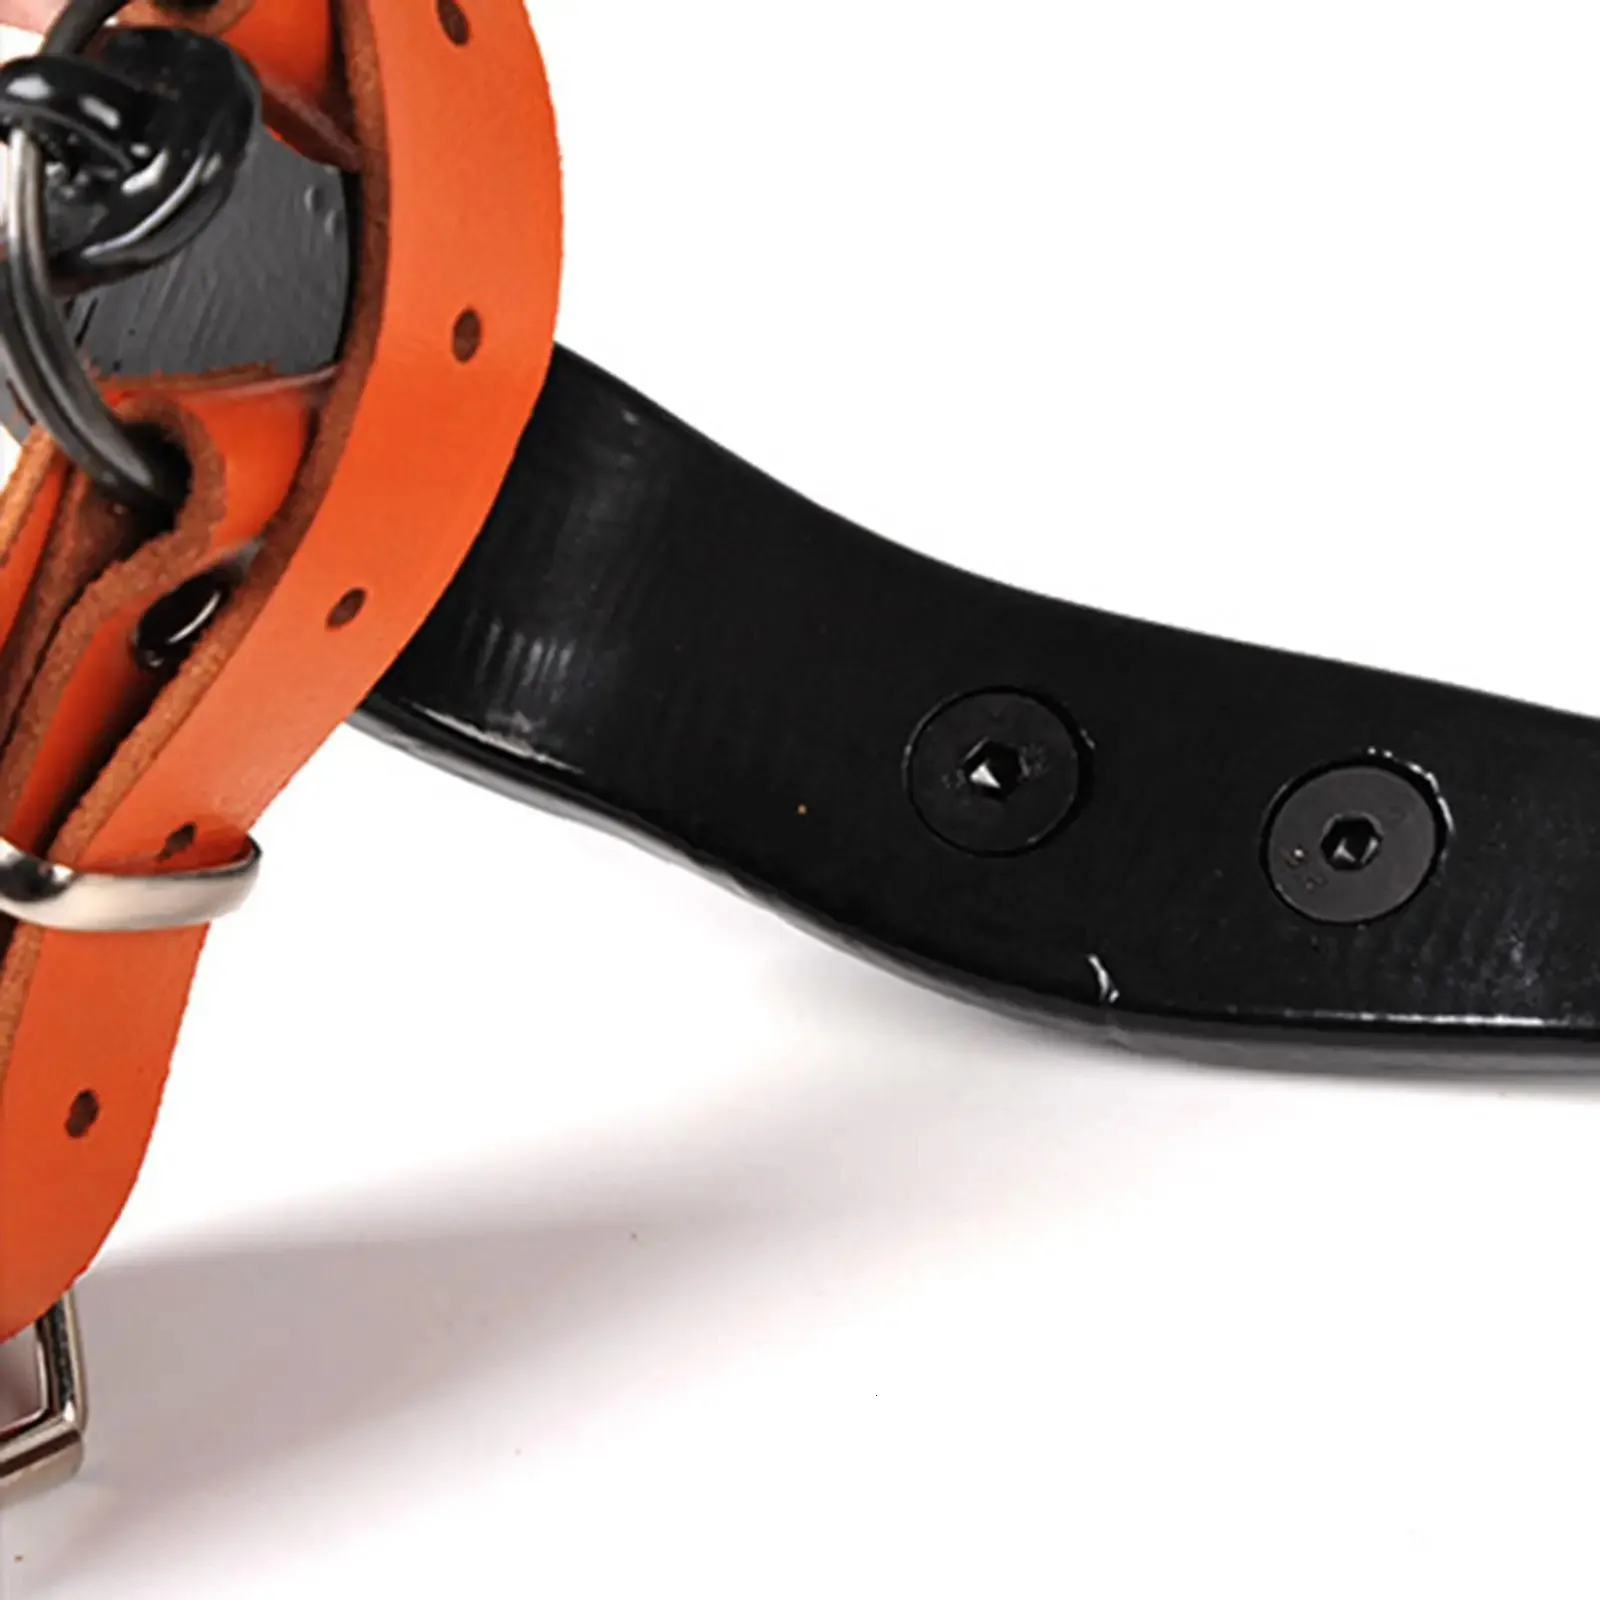 Outdoor Tree Climbing Spike With Custom Leather Gloves Durable Climber  Harness For Climbers 231021 From Bao05, $74.32